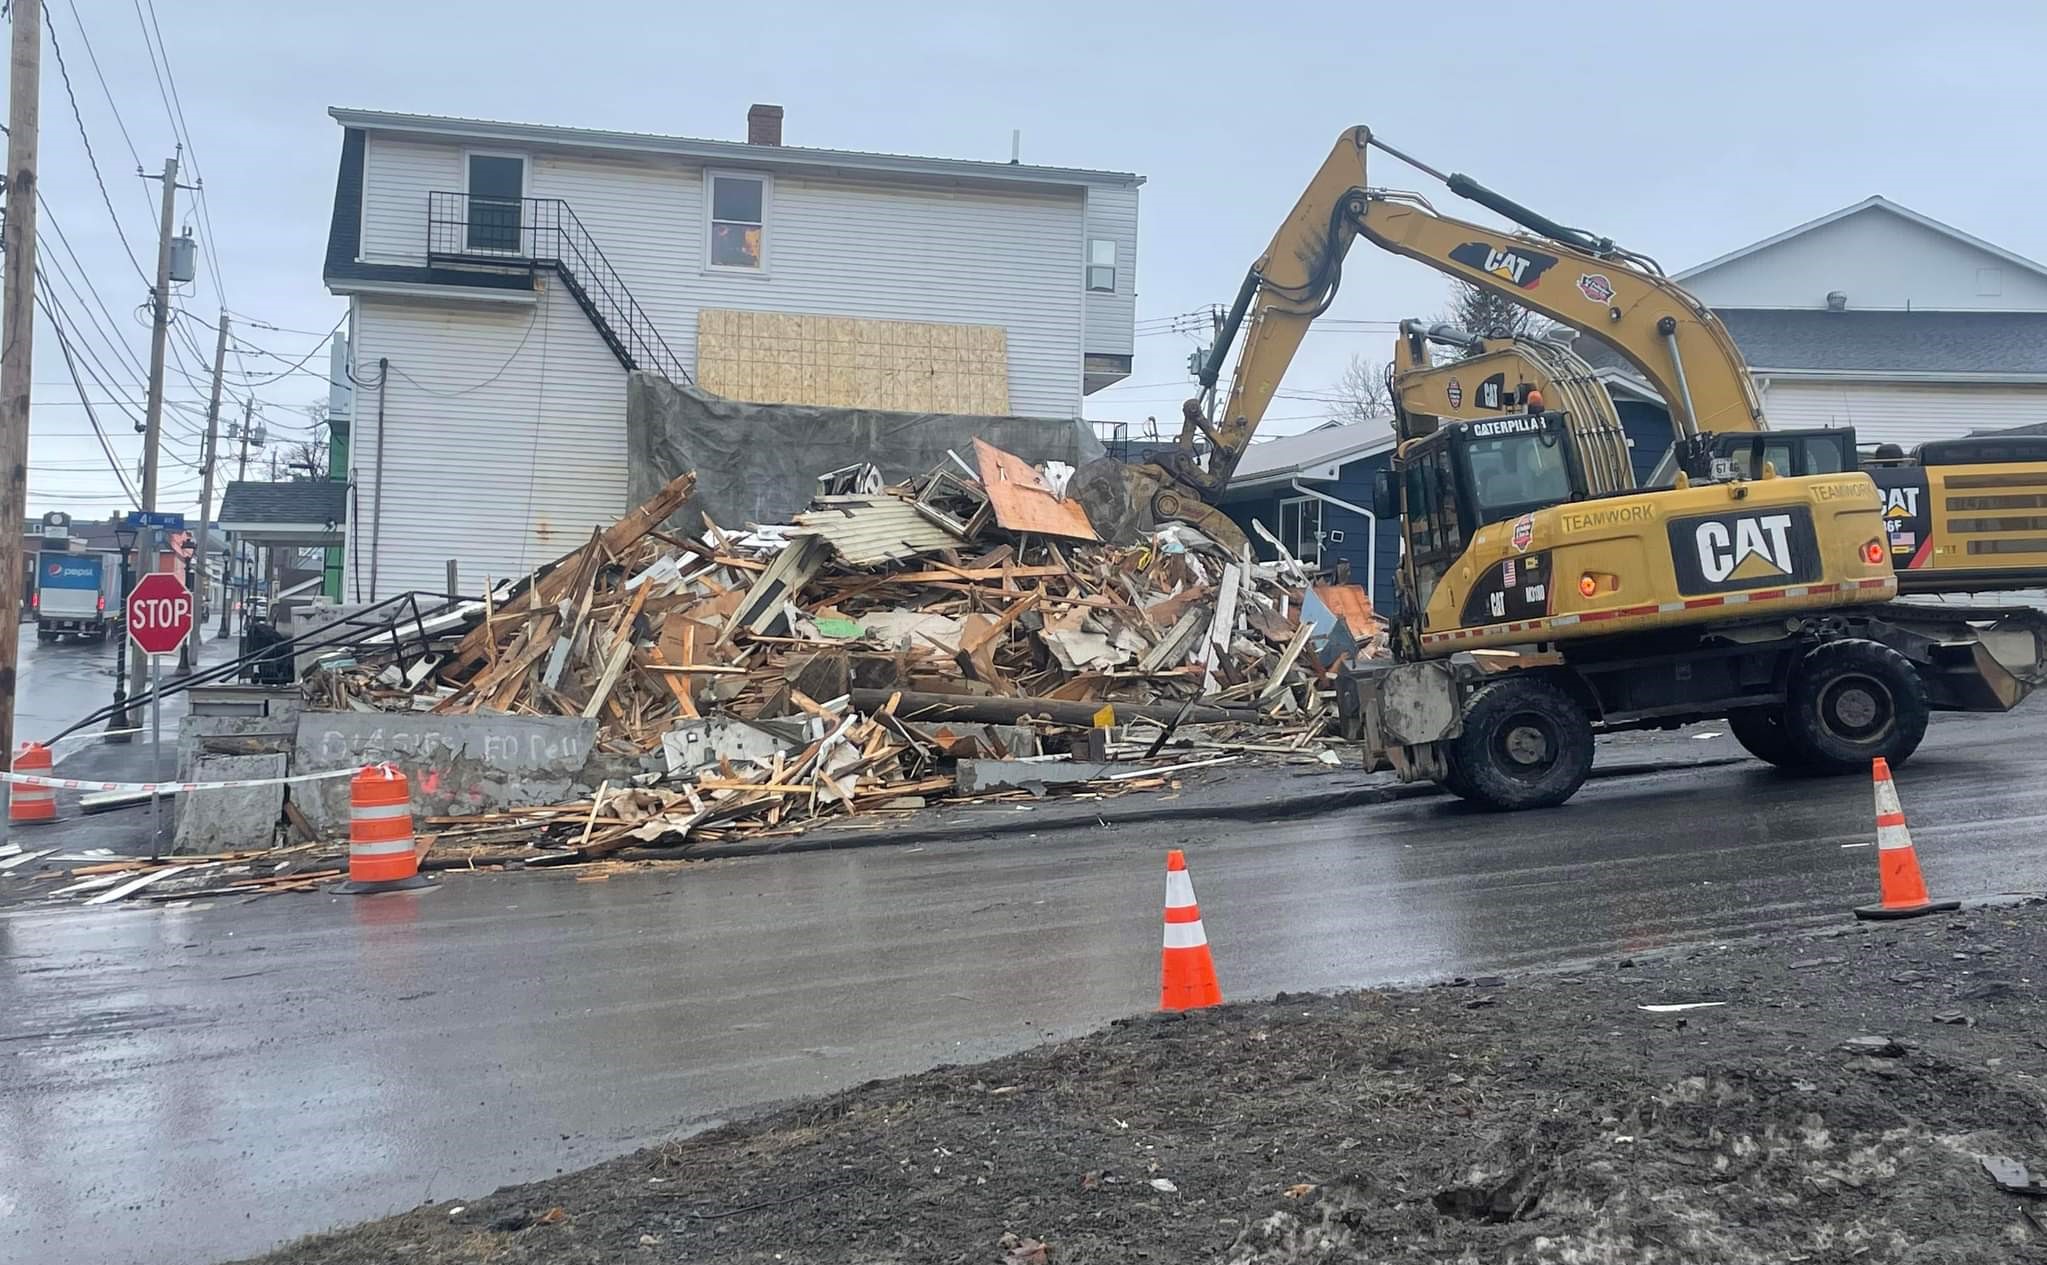 A residential building on the corner of 14th Avenue and Main Street in Madawaska is being demolished by Ed Pelletier & Sons as part of the Midtown Plaza Demolition deal on Apr. 26. (Emily Jerkins | St. John Valley Times)